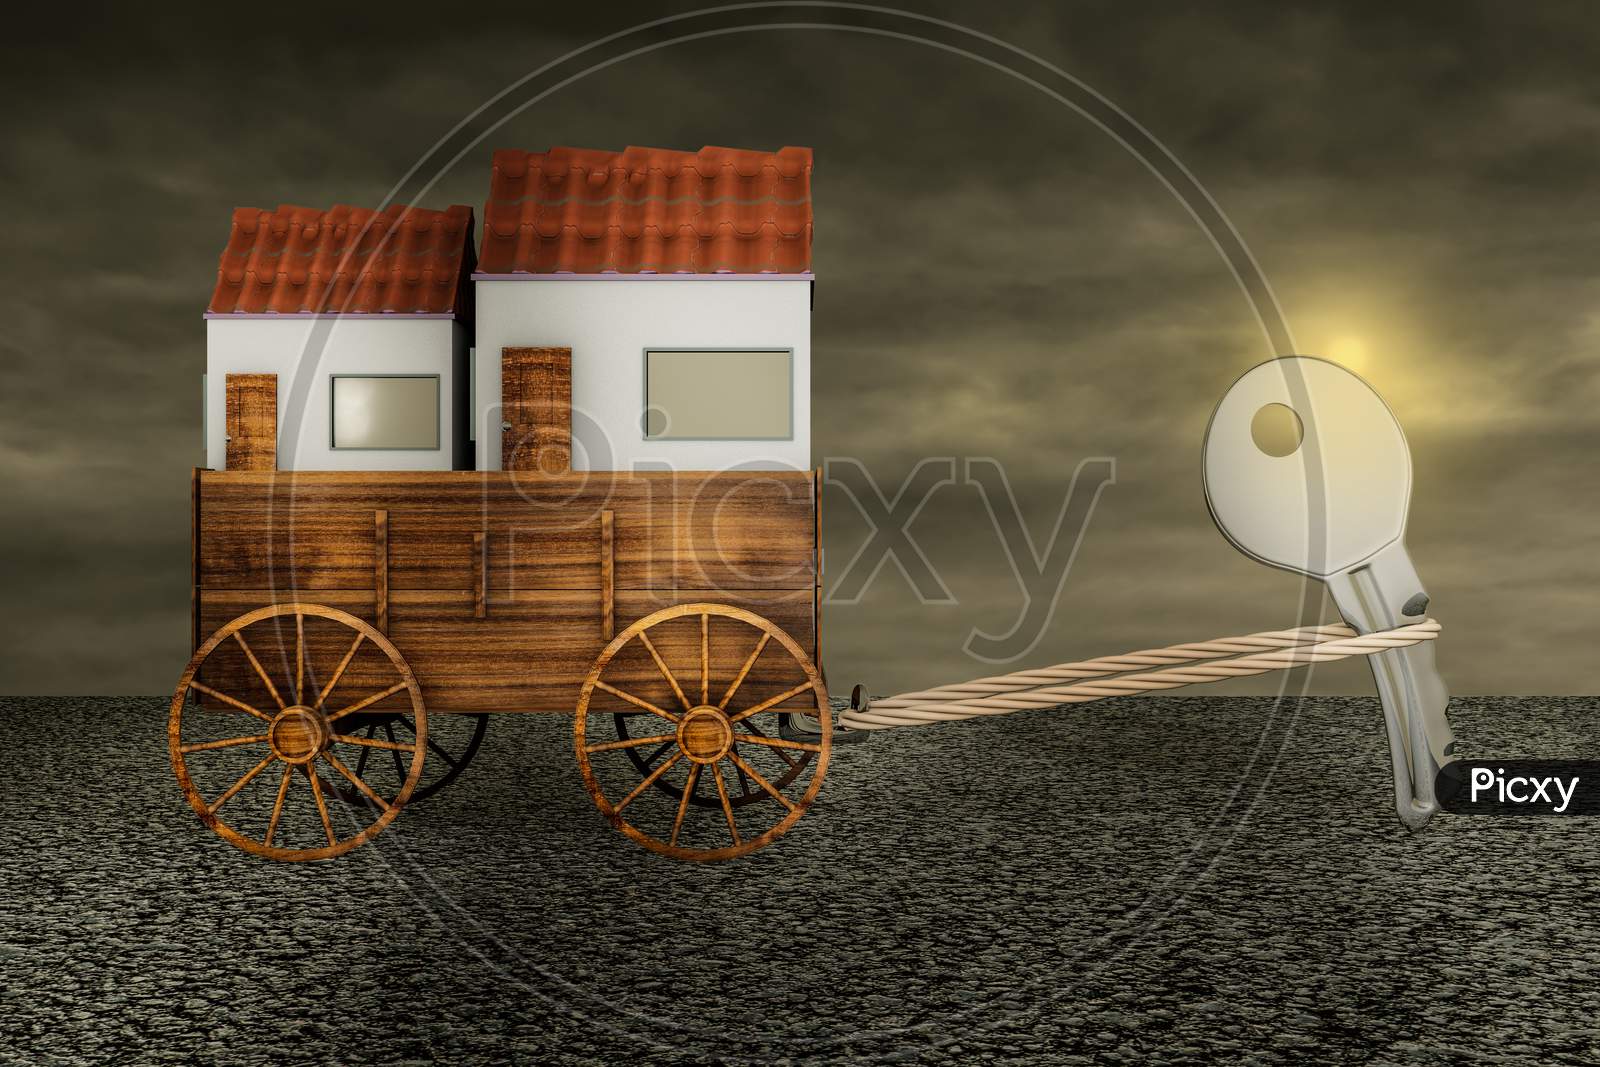 Key Dragging A Farm Cart Of Two Houses On Asphalt In A Sunset Day. Real Estate Agent Or Independent Contractor Or Develop A Business Plan Or Business Expenses Concept. 3D Illustration